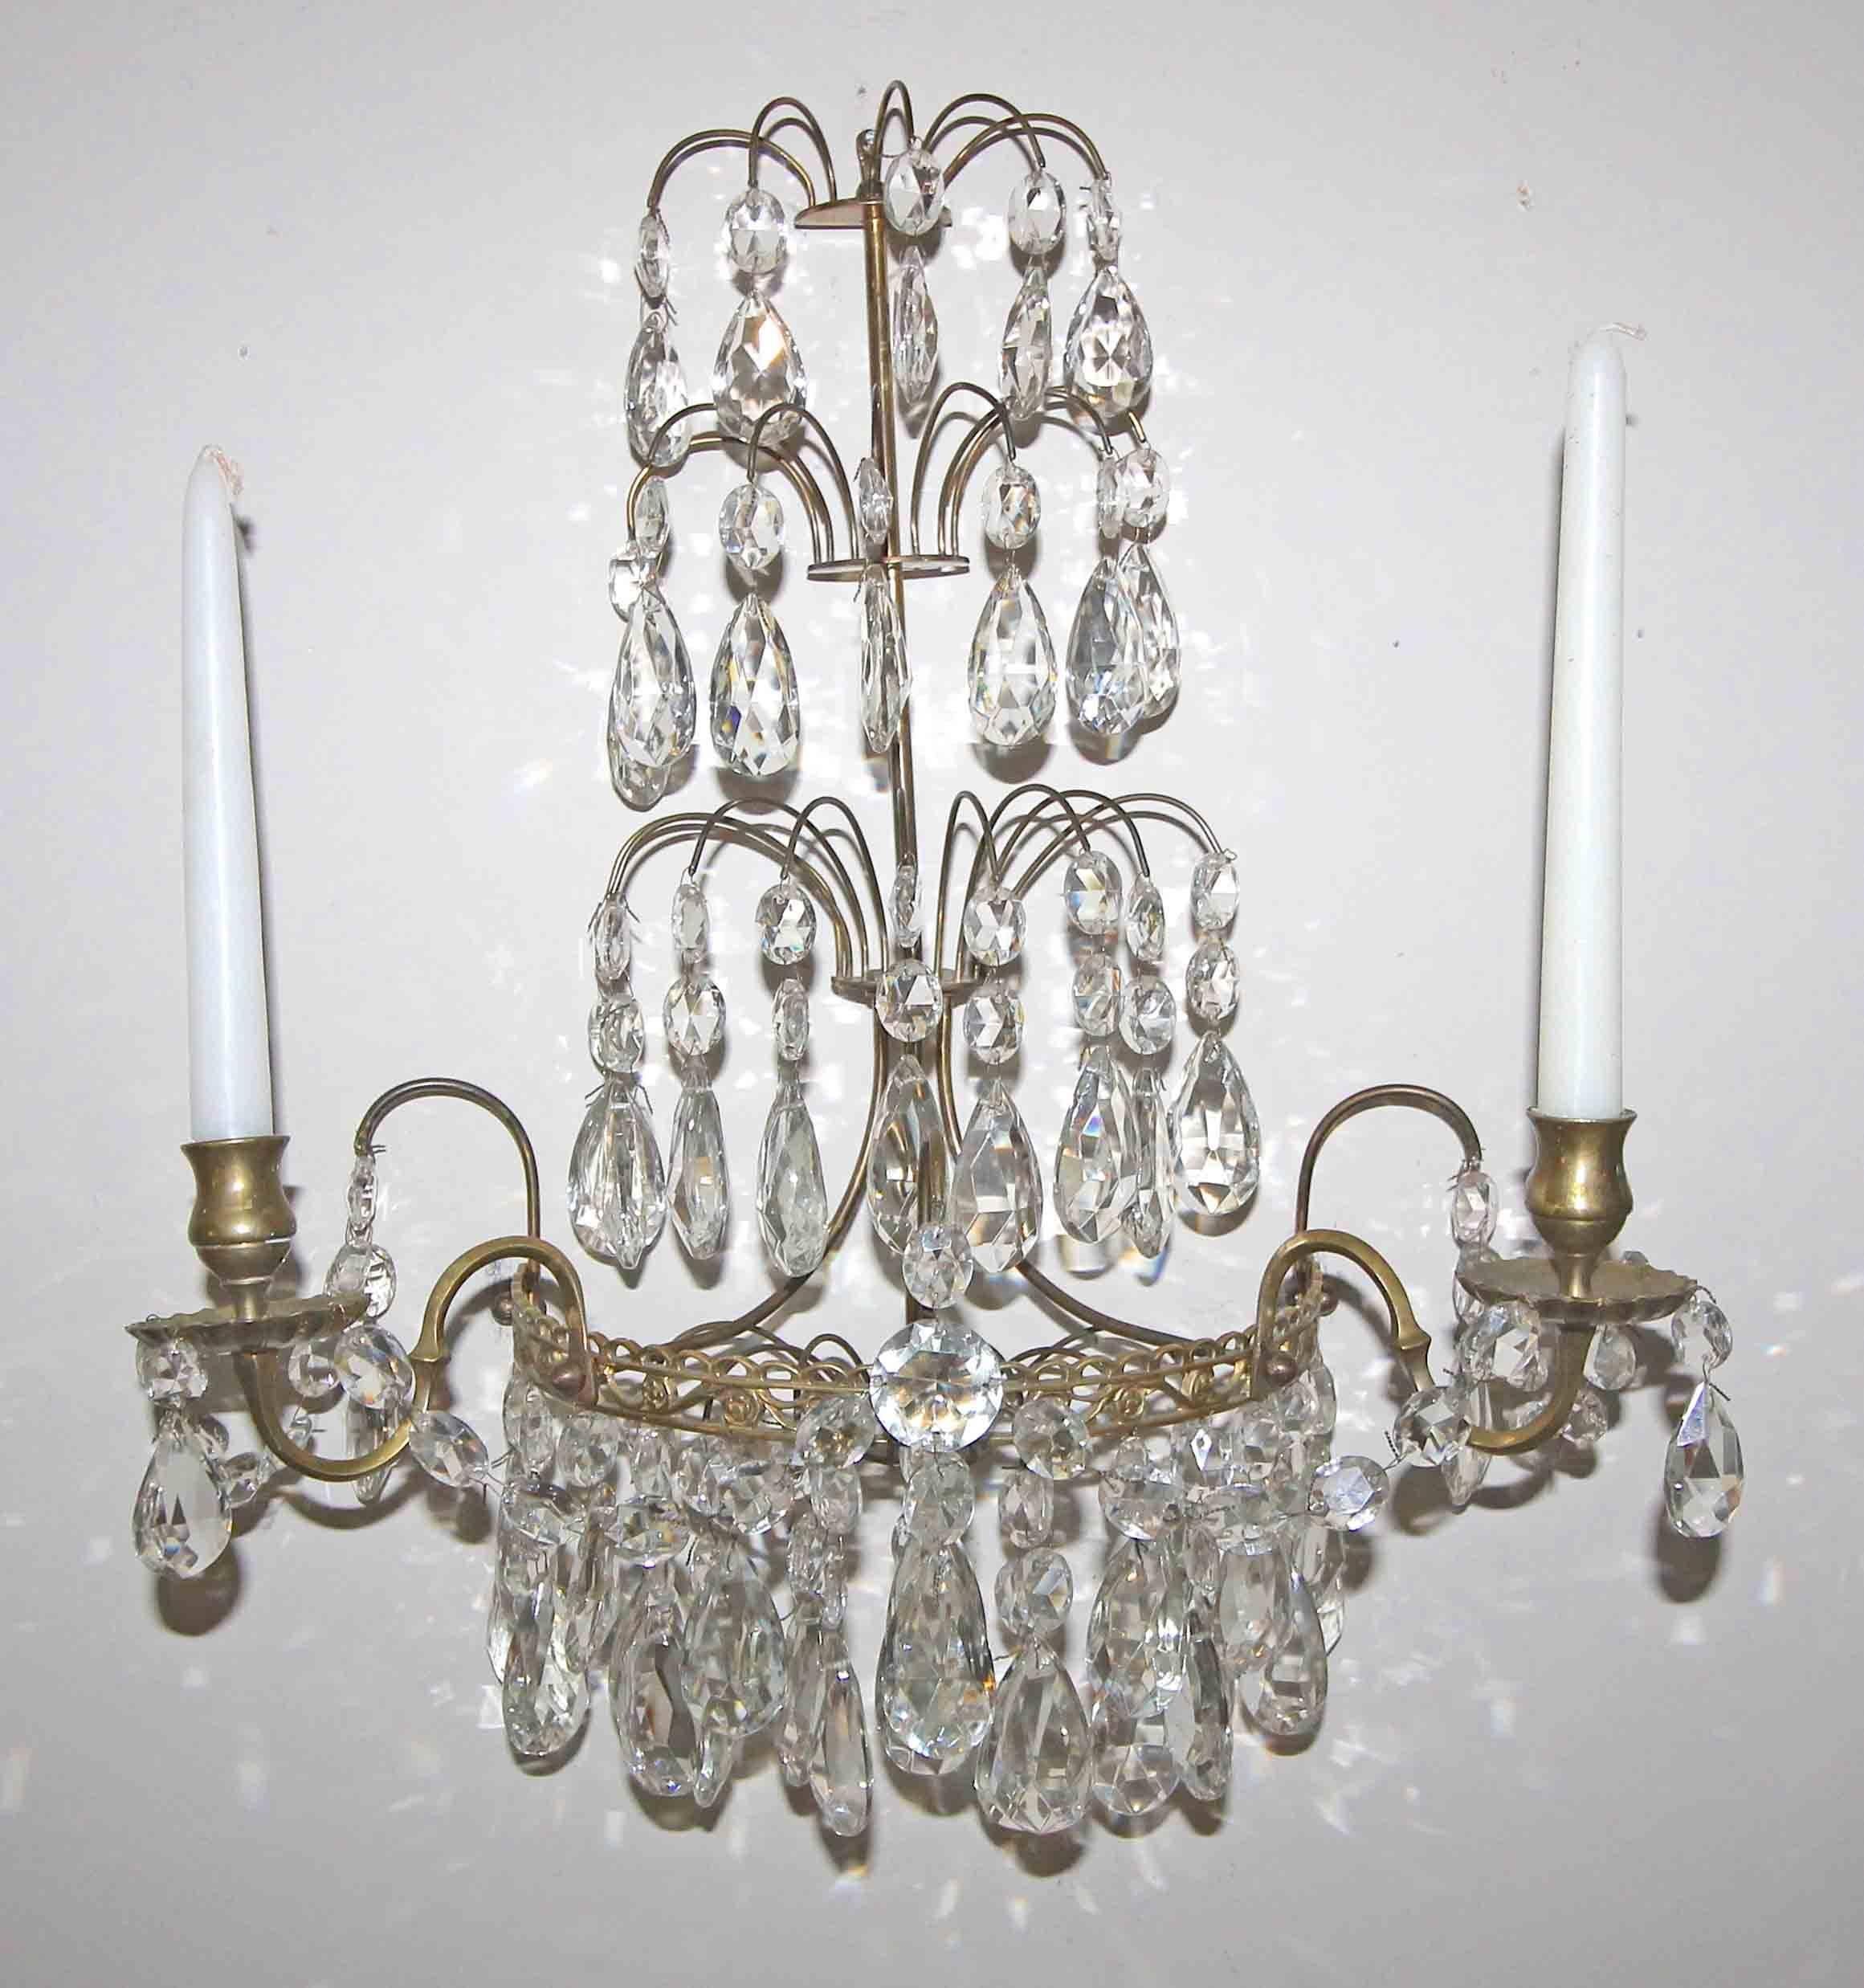 Pair of Swedish Gustavian Style Crystal and Brass Candle Wall Sconces For Sale 3